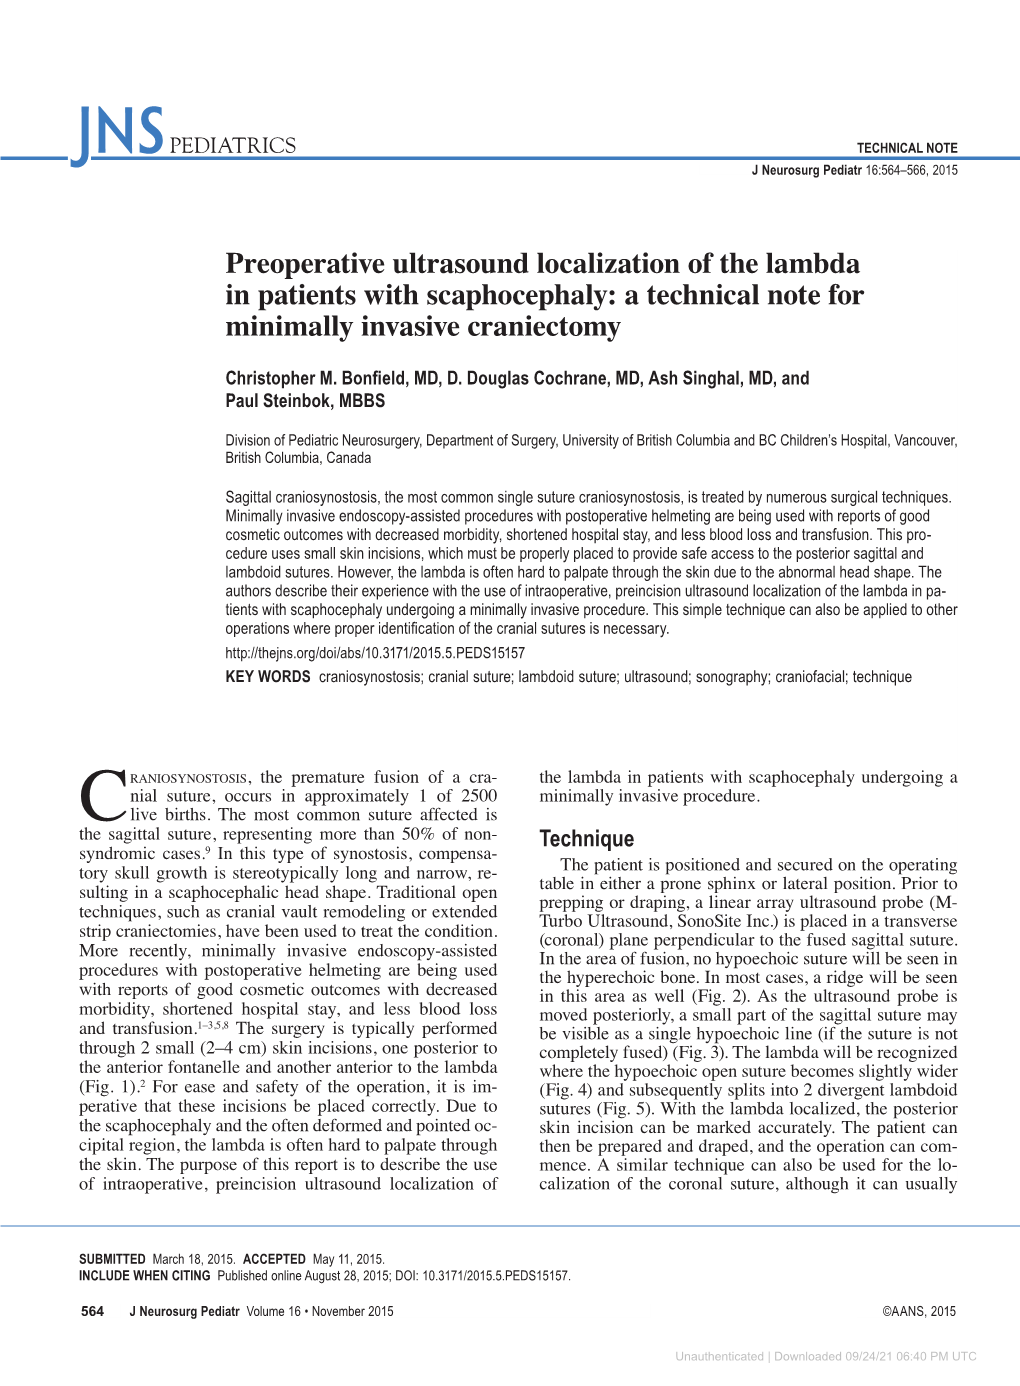 Preoperative Ultrasound Localization of the Lambda in Patients with Scaphocephaly: a Technical Note for Minimally Invasive Craniectomy